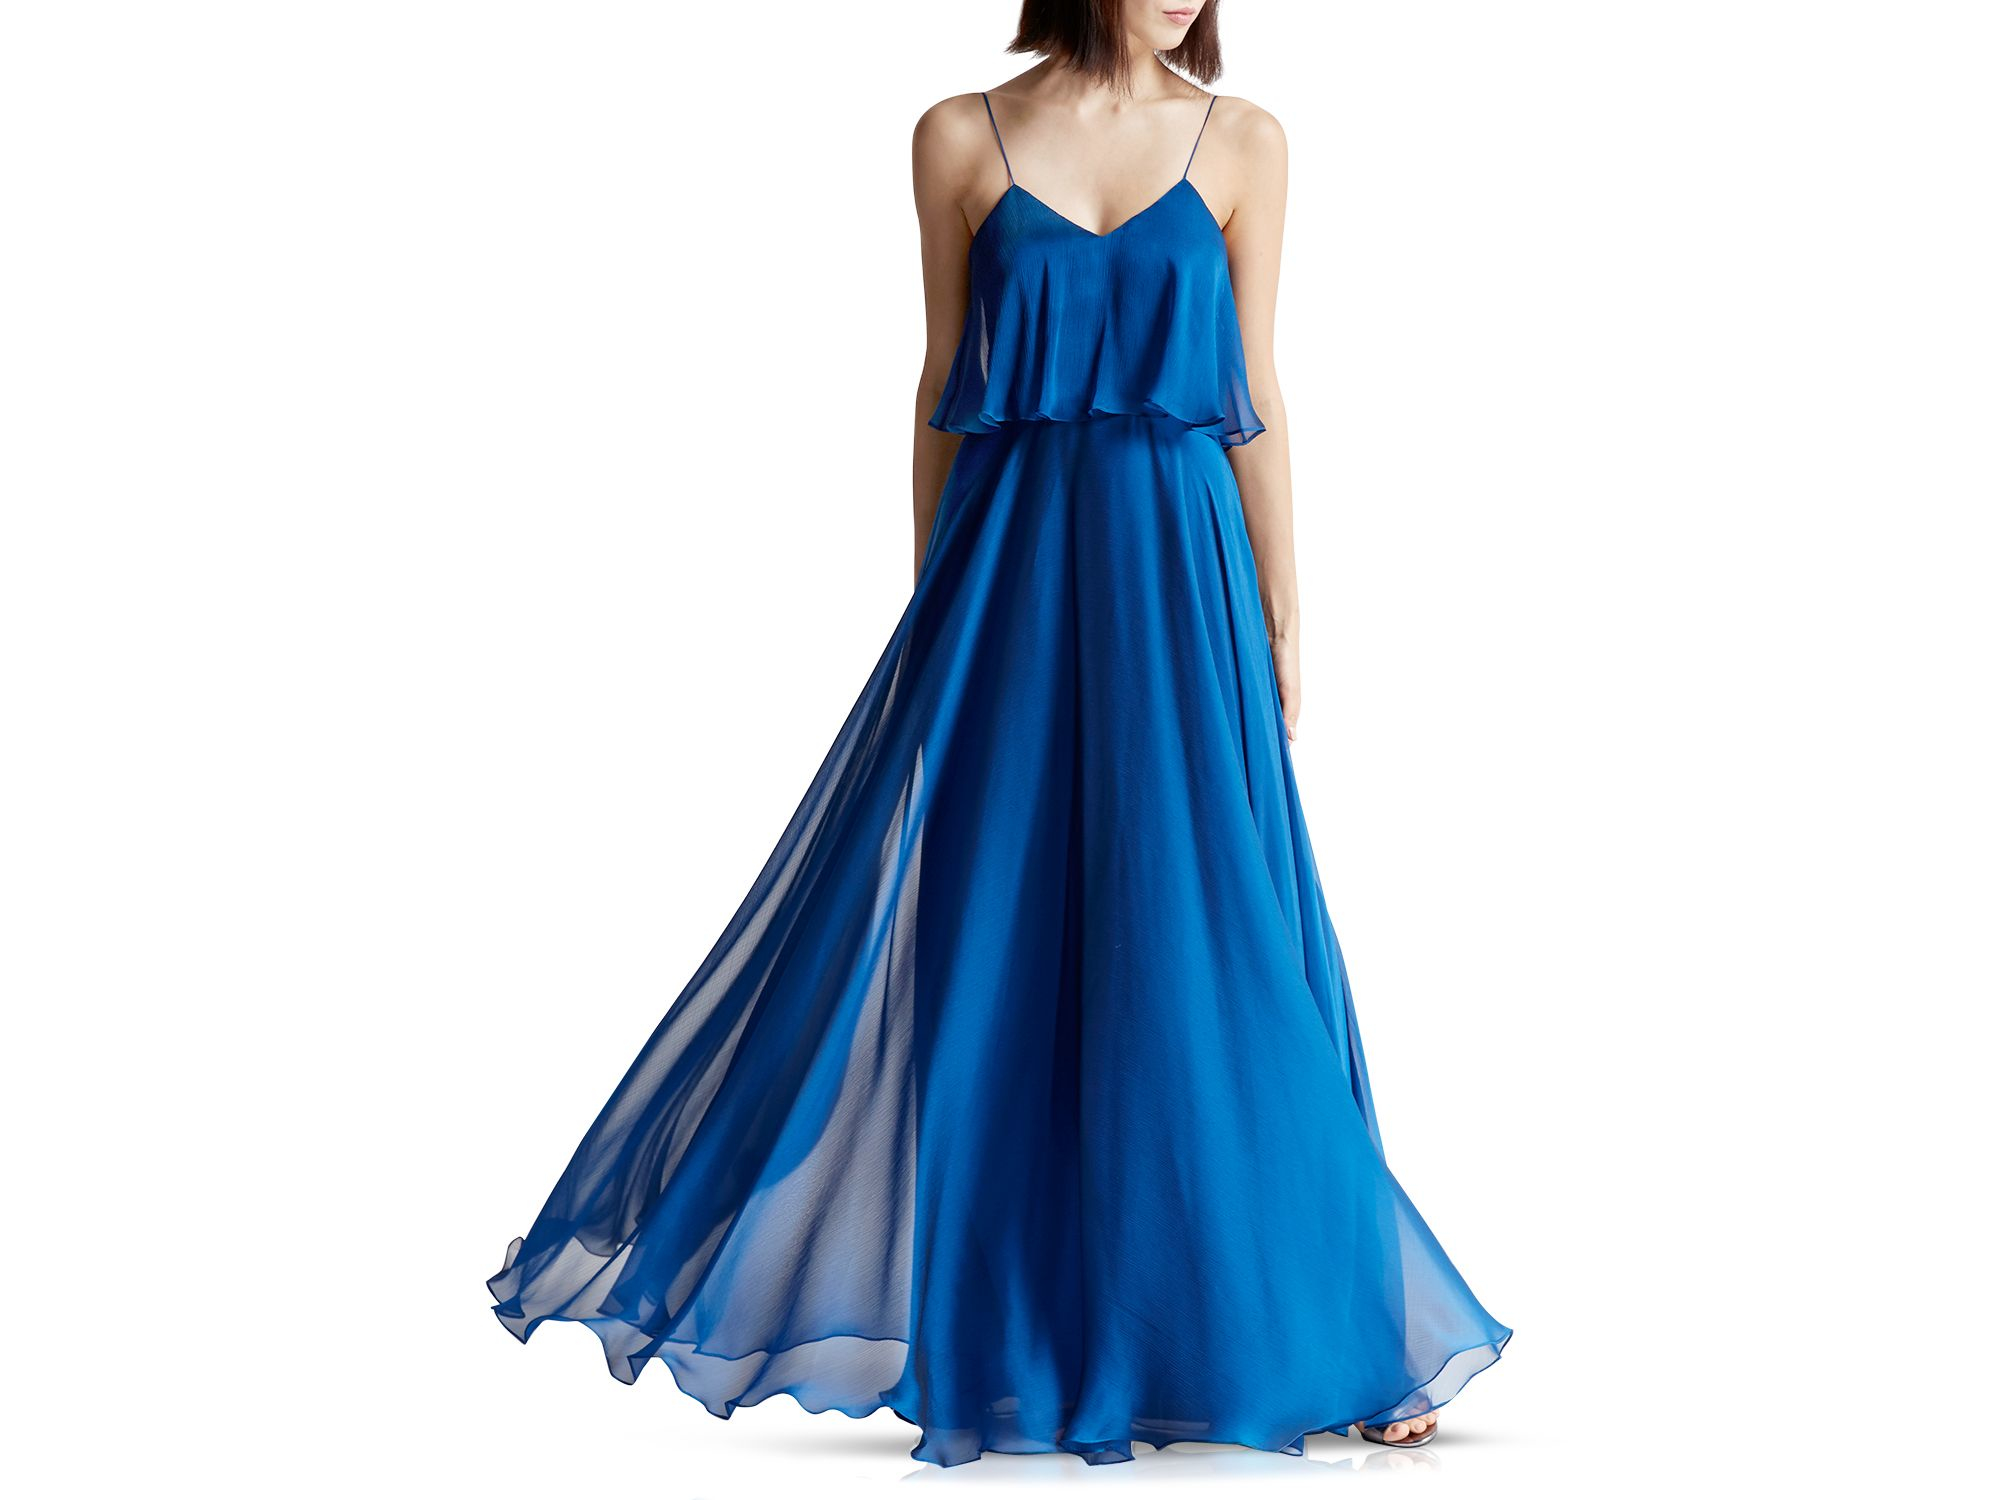 Simple maxi gown for wedding guest